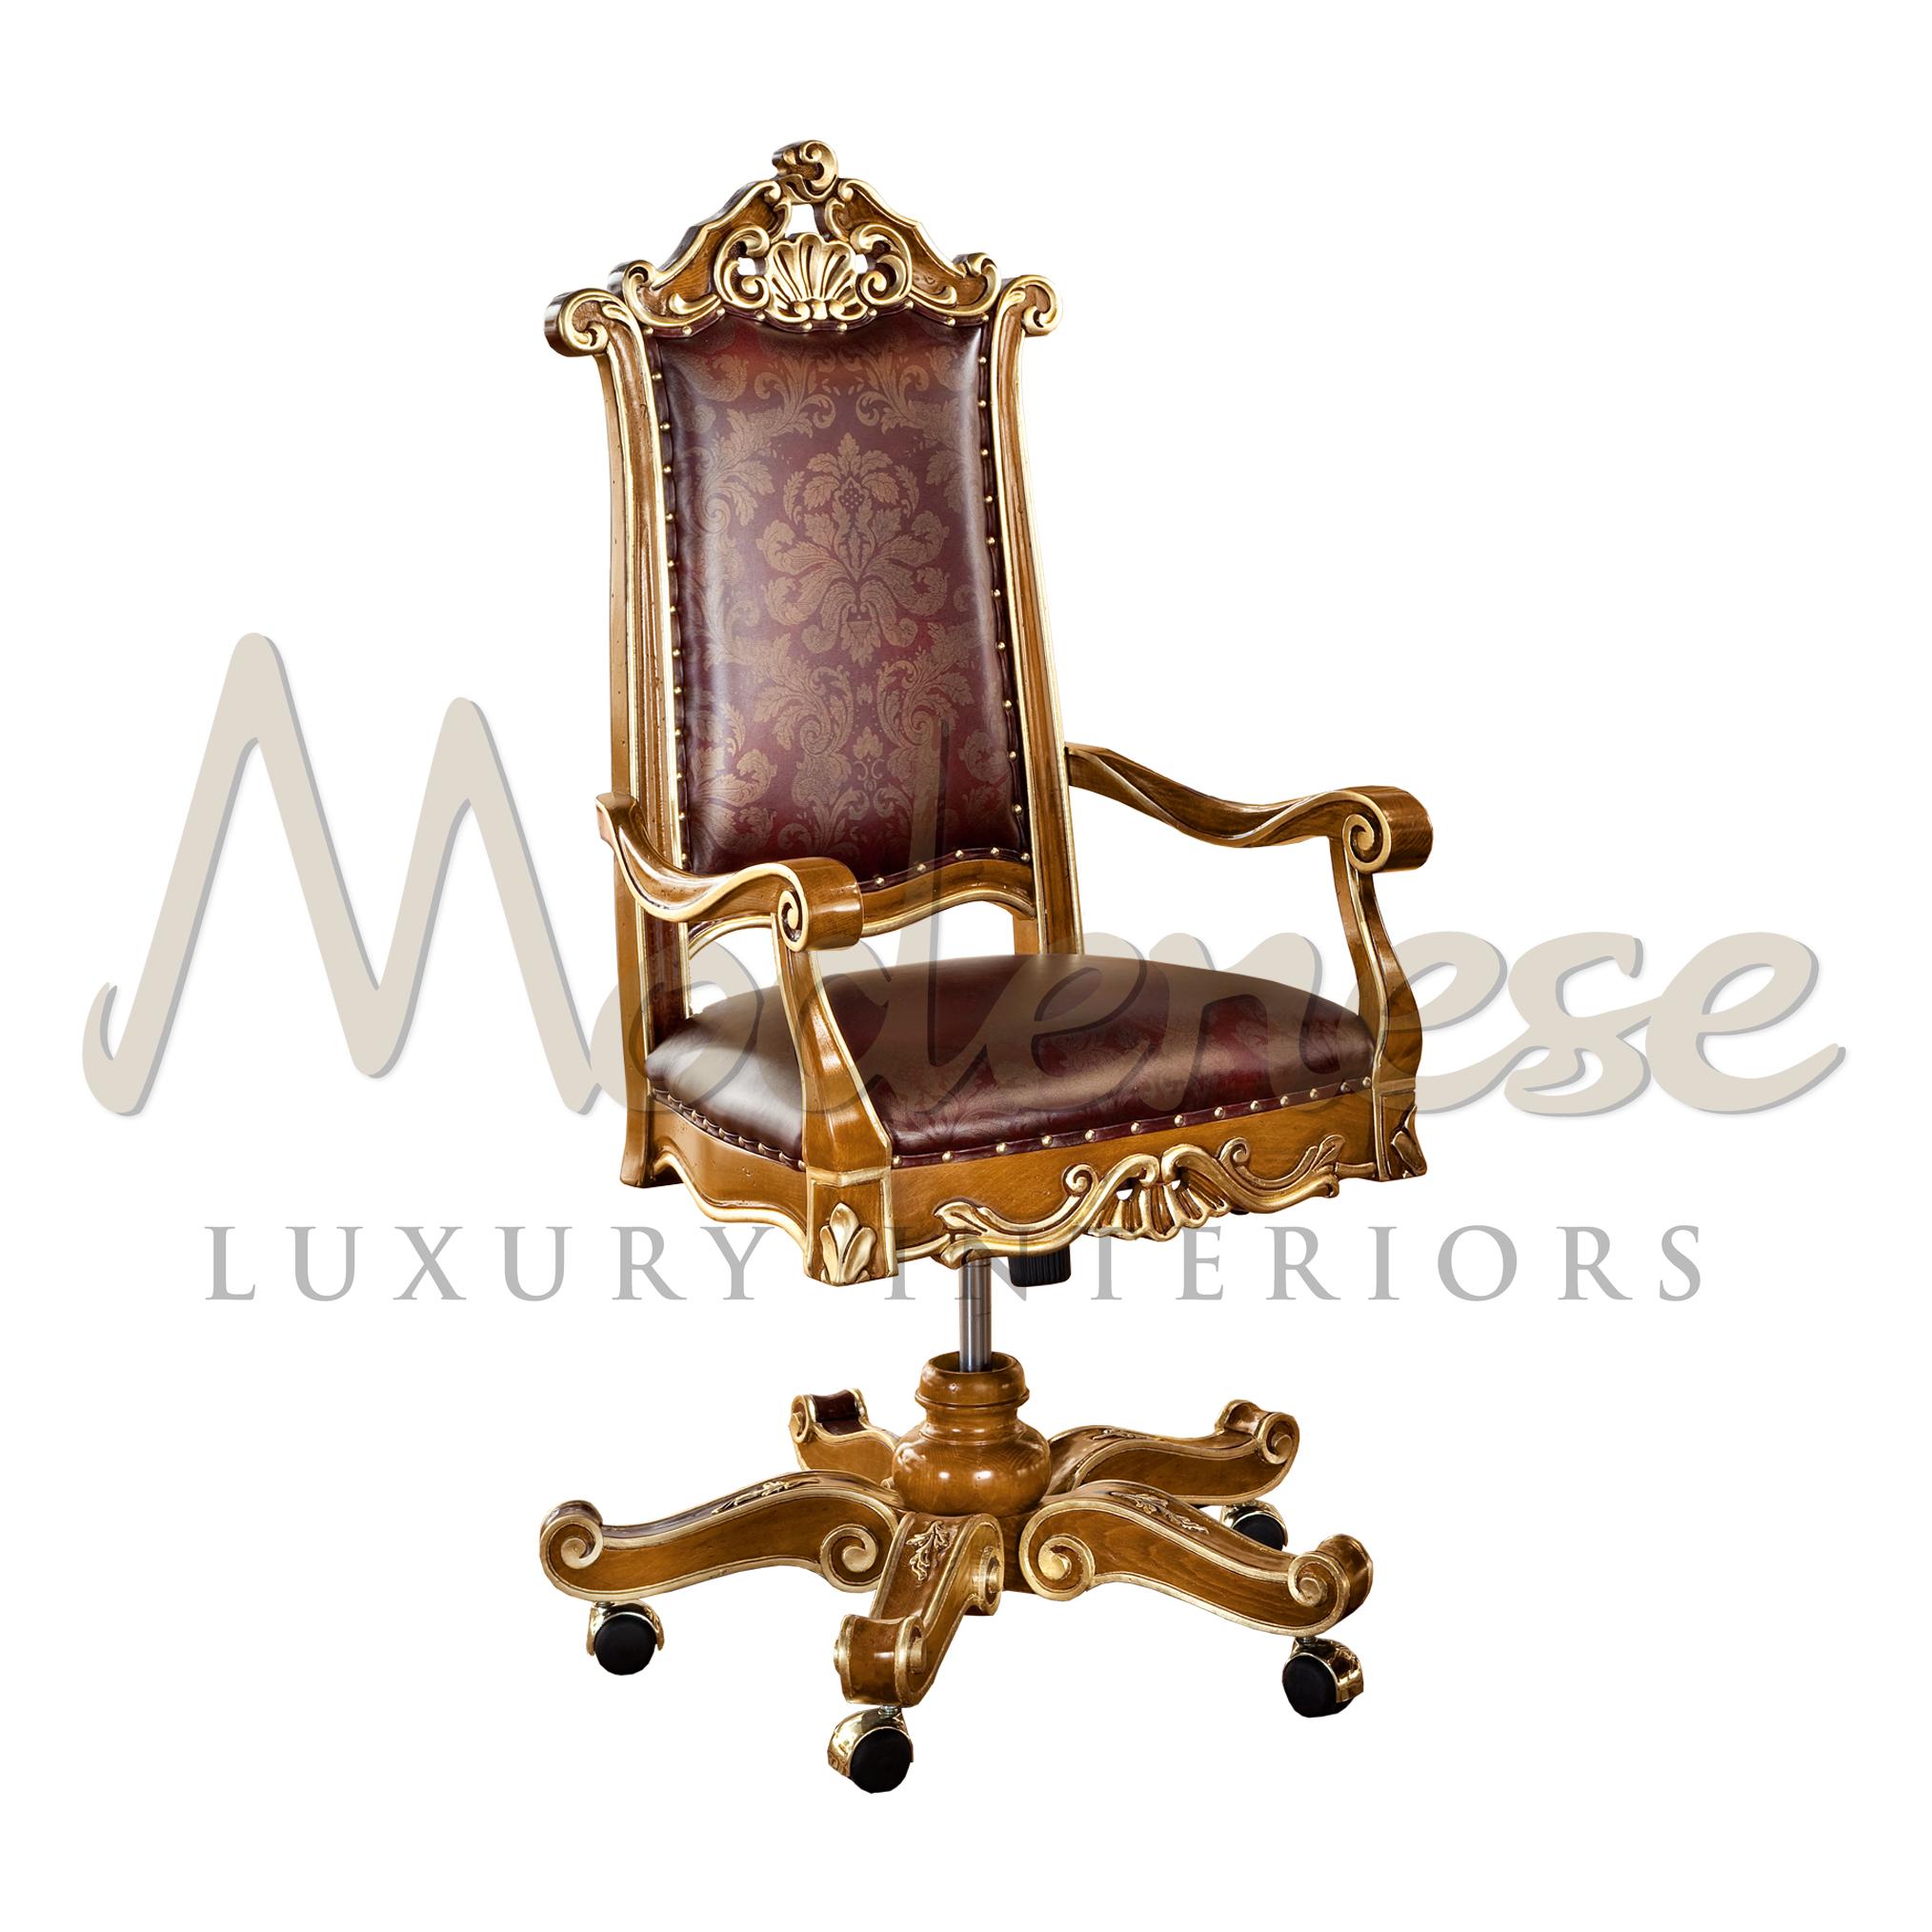 This Modenese Gastone Luxury Interiors bespoke item has been specifically conceived for managers and executive offices. Its unique authority and attention to detail represent the perfect solution for CEOs and top managers. Chair structure in